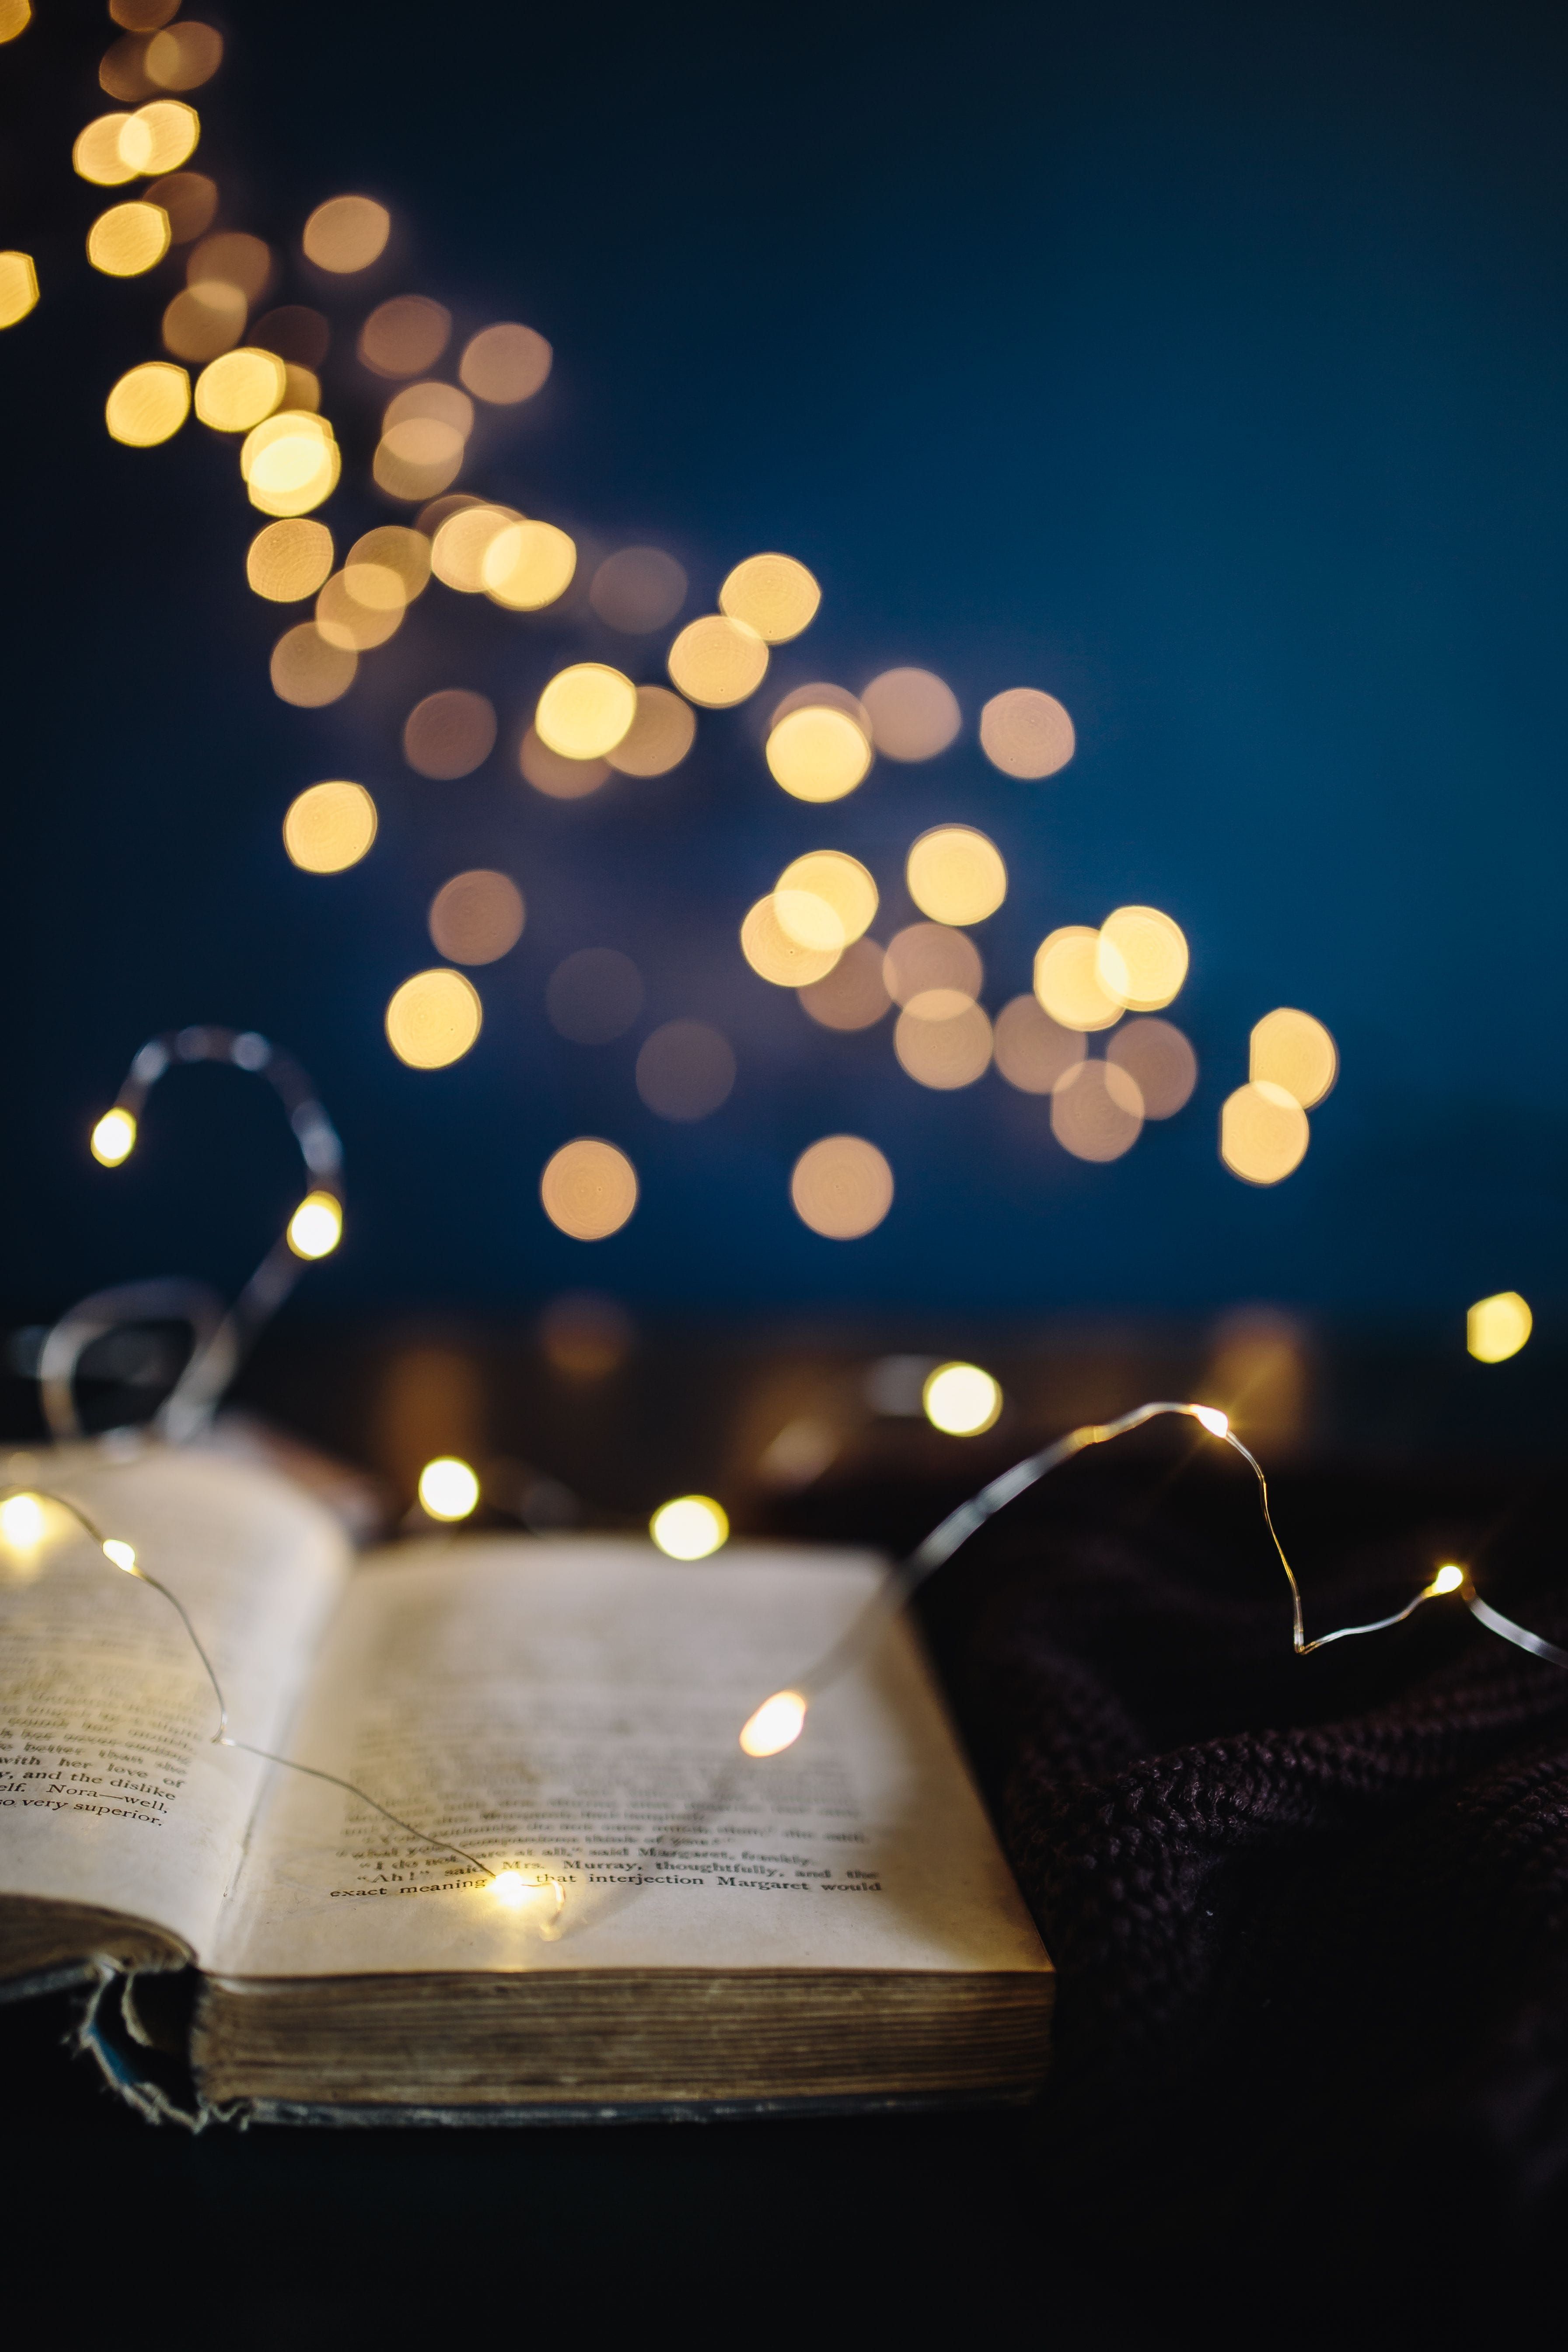 An open book with a lighted string of lights in the background - Fairy lights